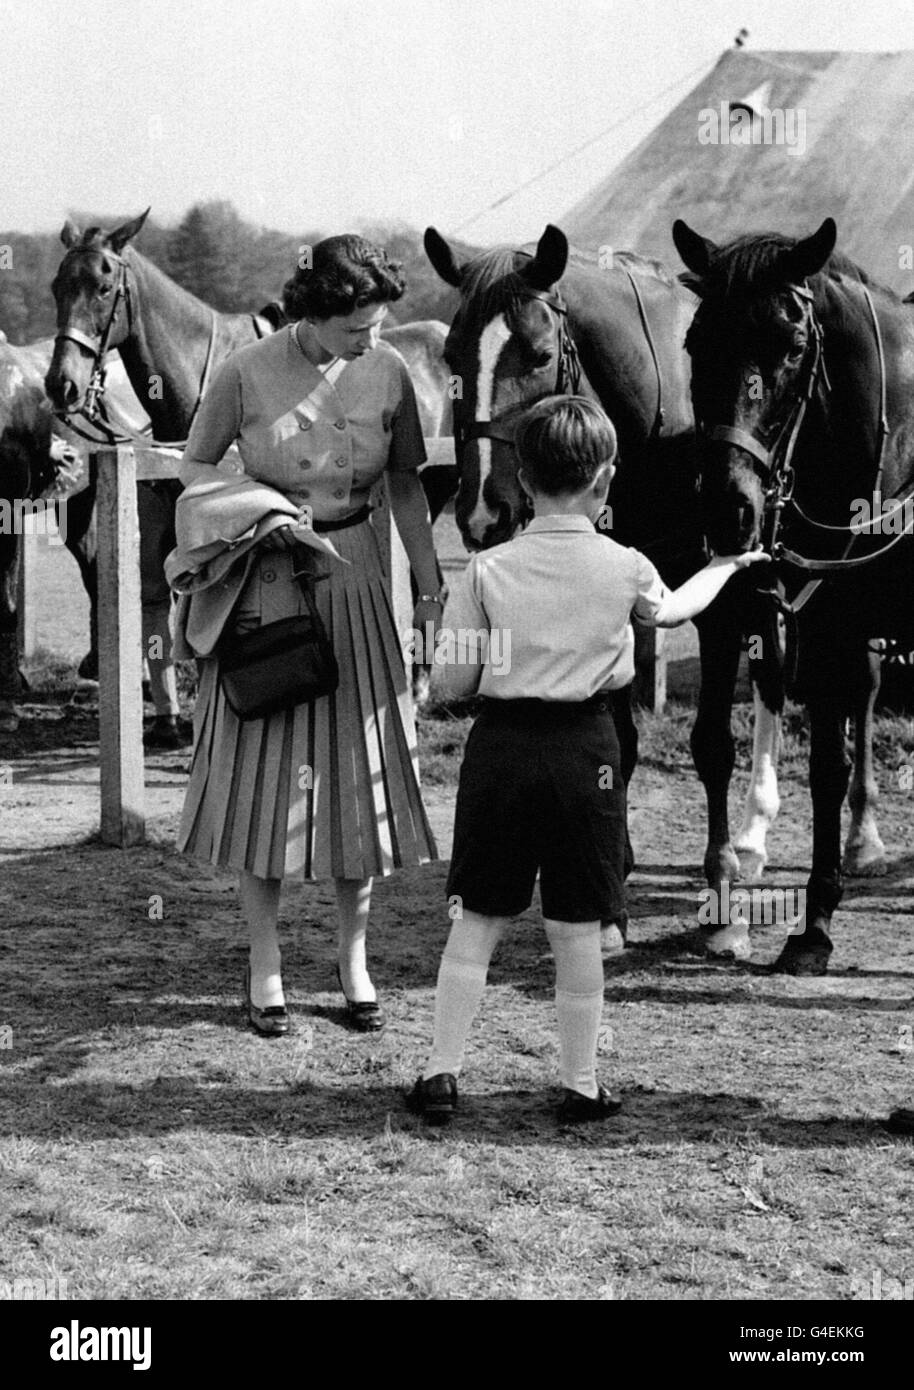 The Prince of Wales watched by his mother Queen Elizabeth II, feeds one of the ponies during a break in the polo tournament, in which the Duke of Edinburgh was playing at Smith's lawn in Windsor Great Park. Stock Photo